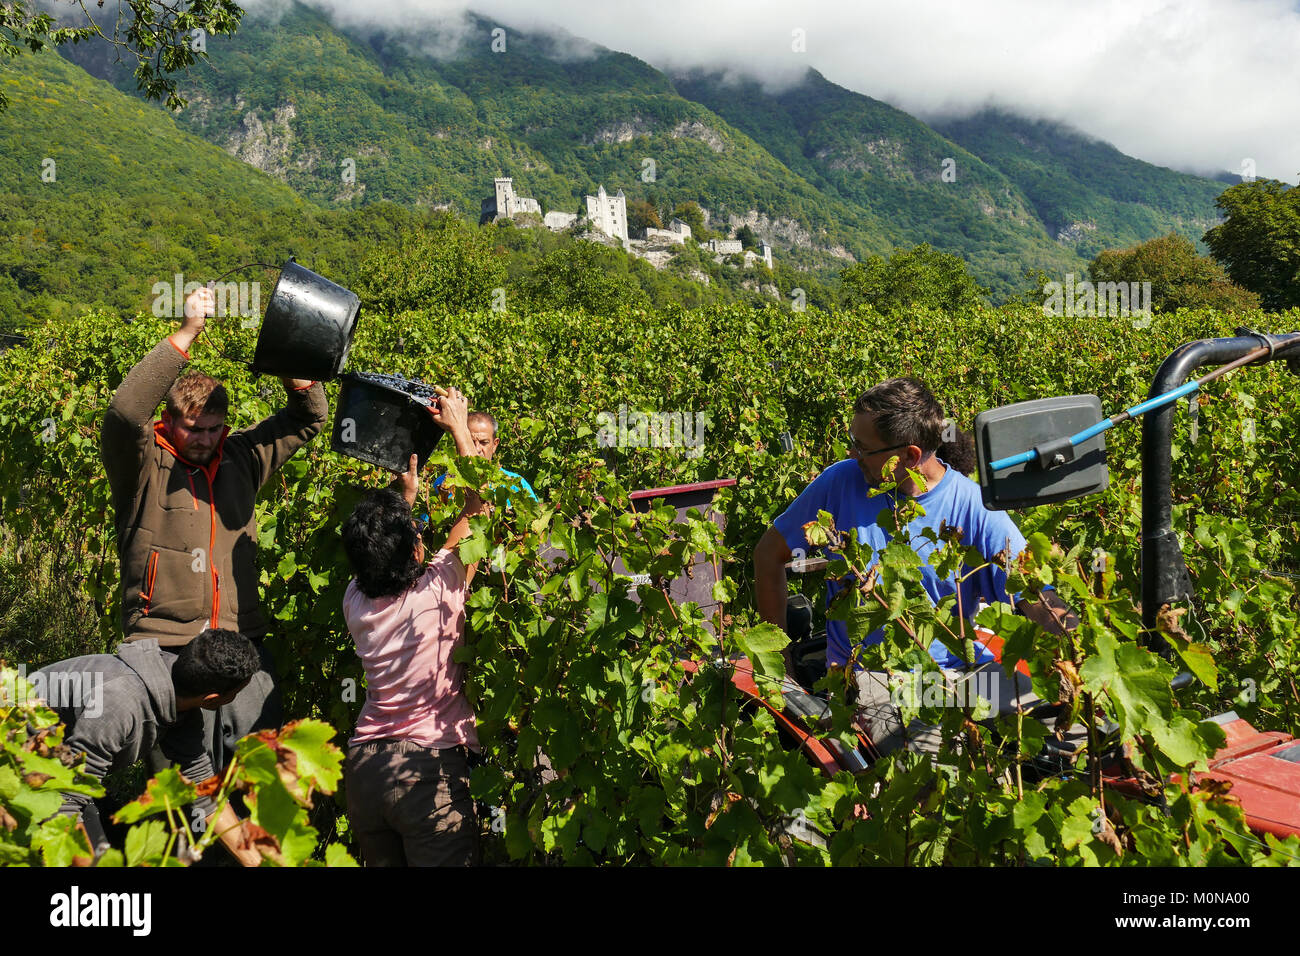 Saint-Pierre d'Albigny (Savoy, central eastern France): Biodynamic wine production, hand harvesting in a Gamay plot. Grape pickers working in the midd Stock Photo